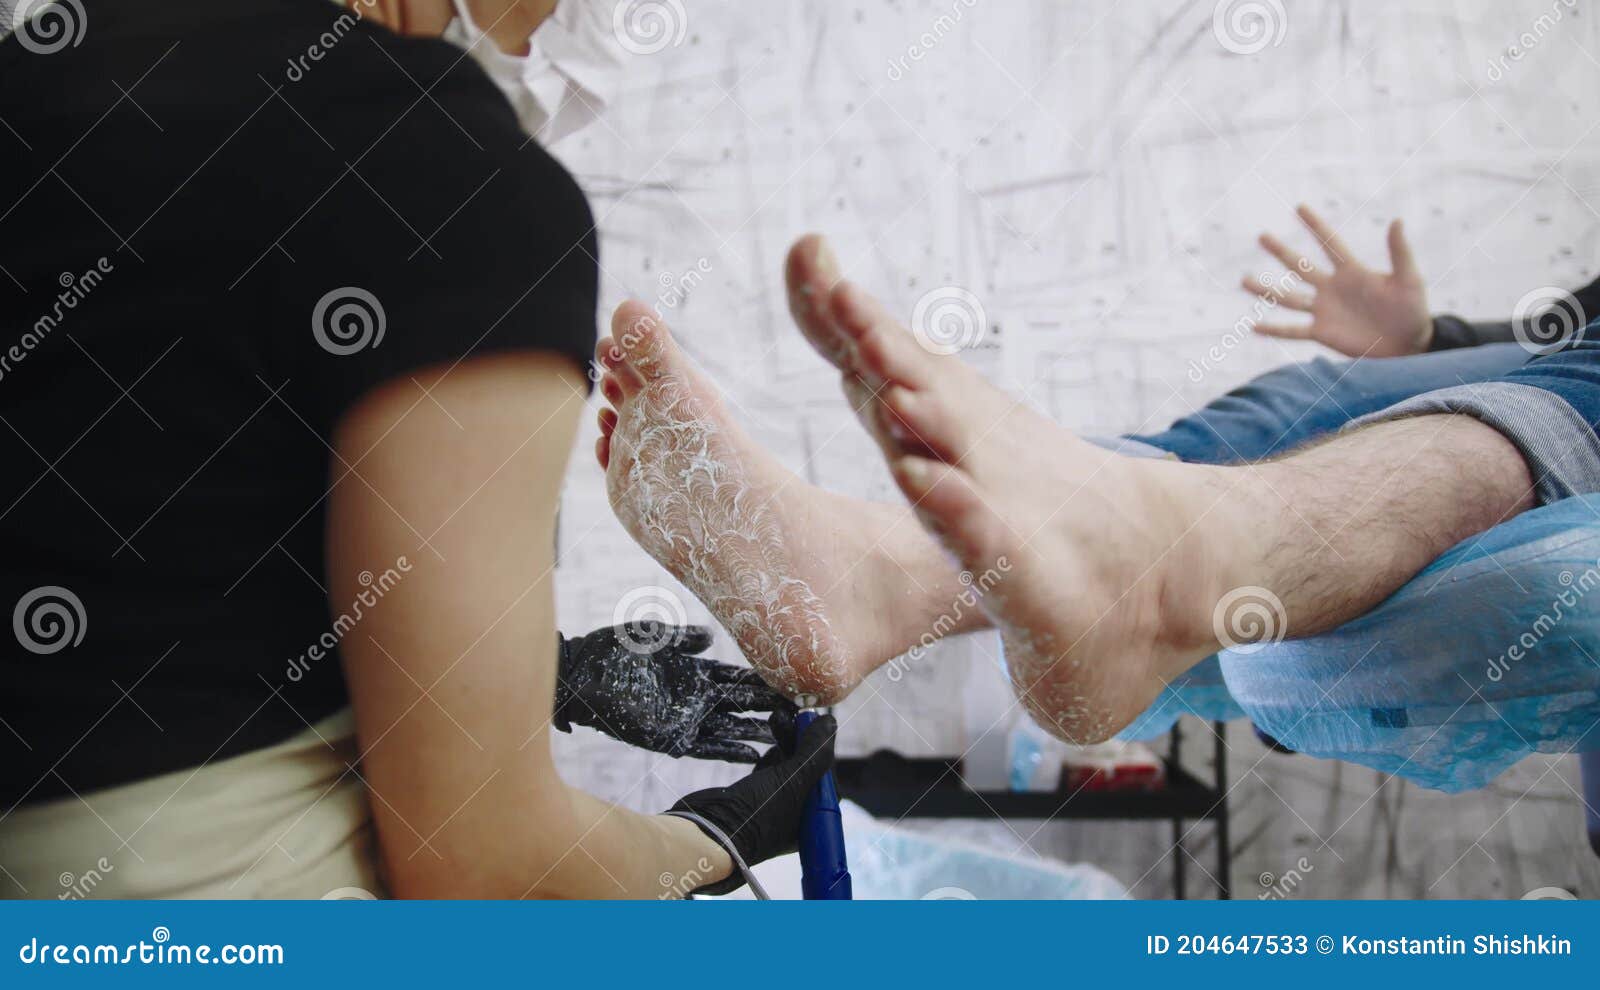 Male foot master